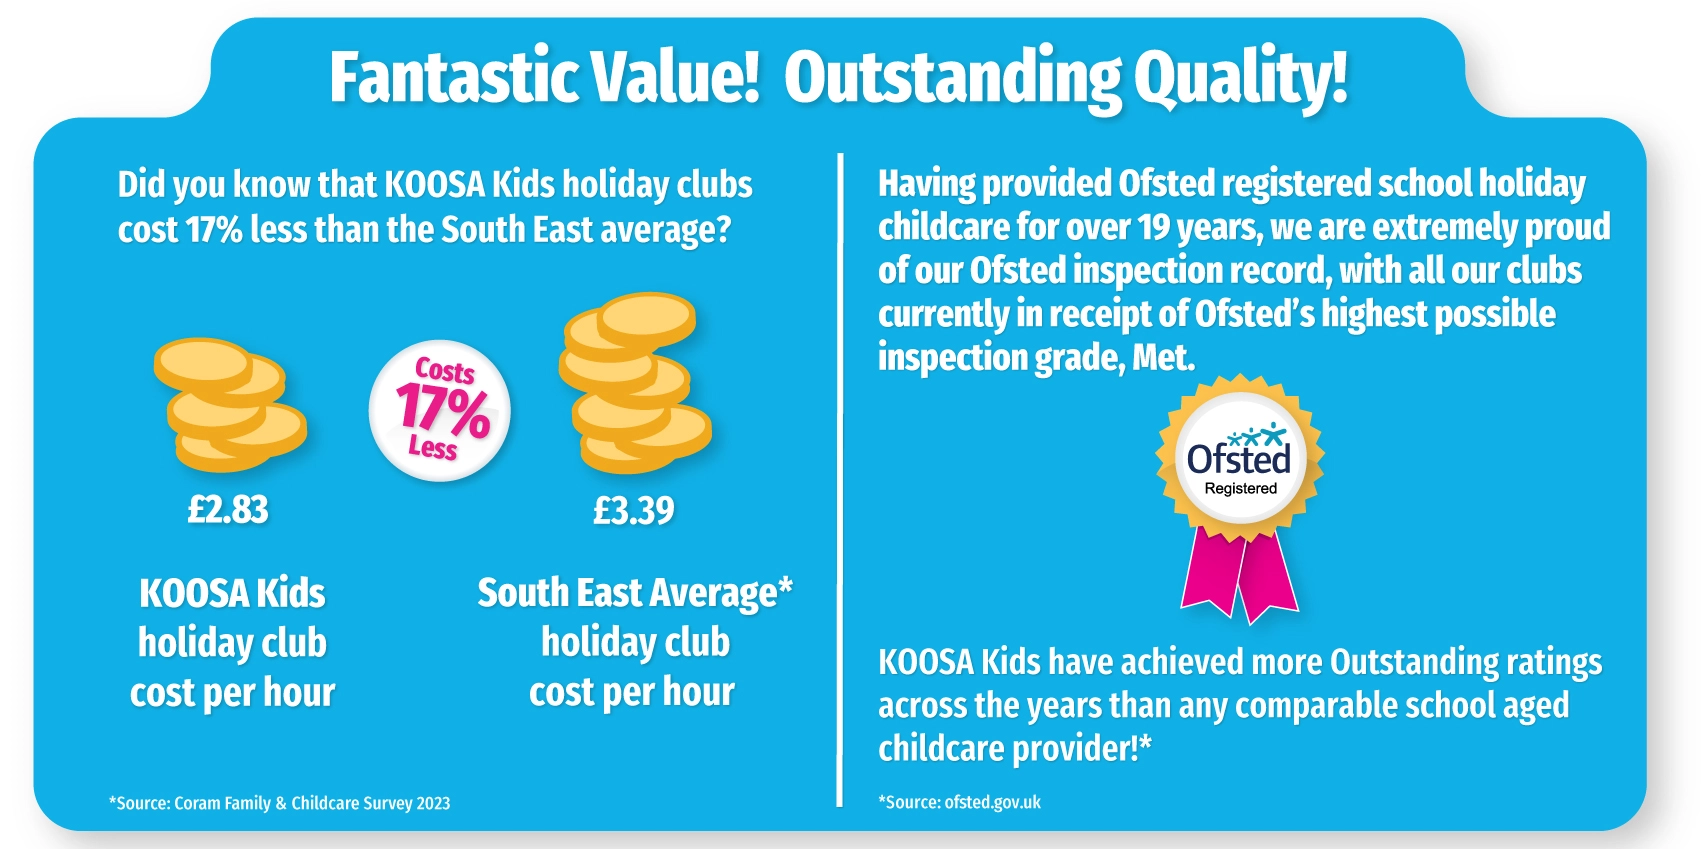 KOOSA Kids Holiday Clubs, Fantatic Value, Outstanding Quality!